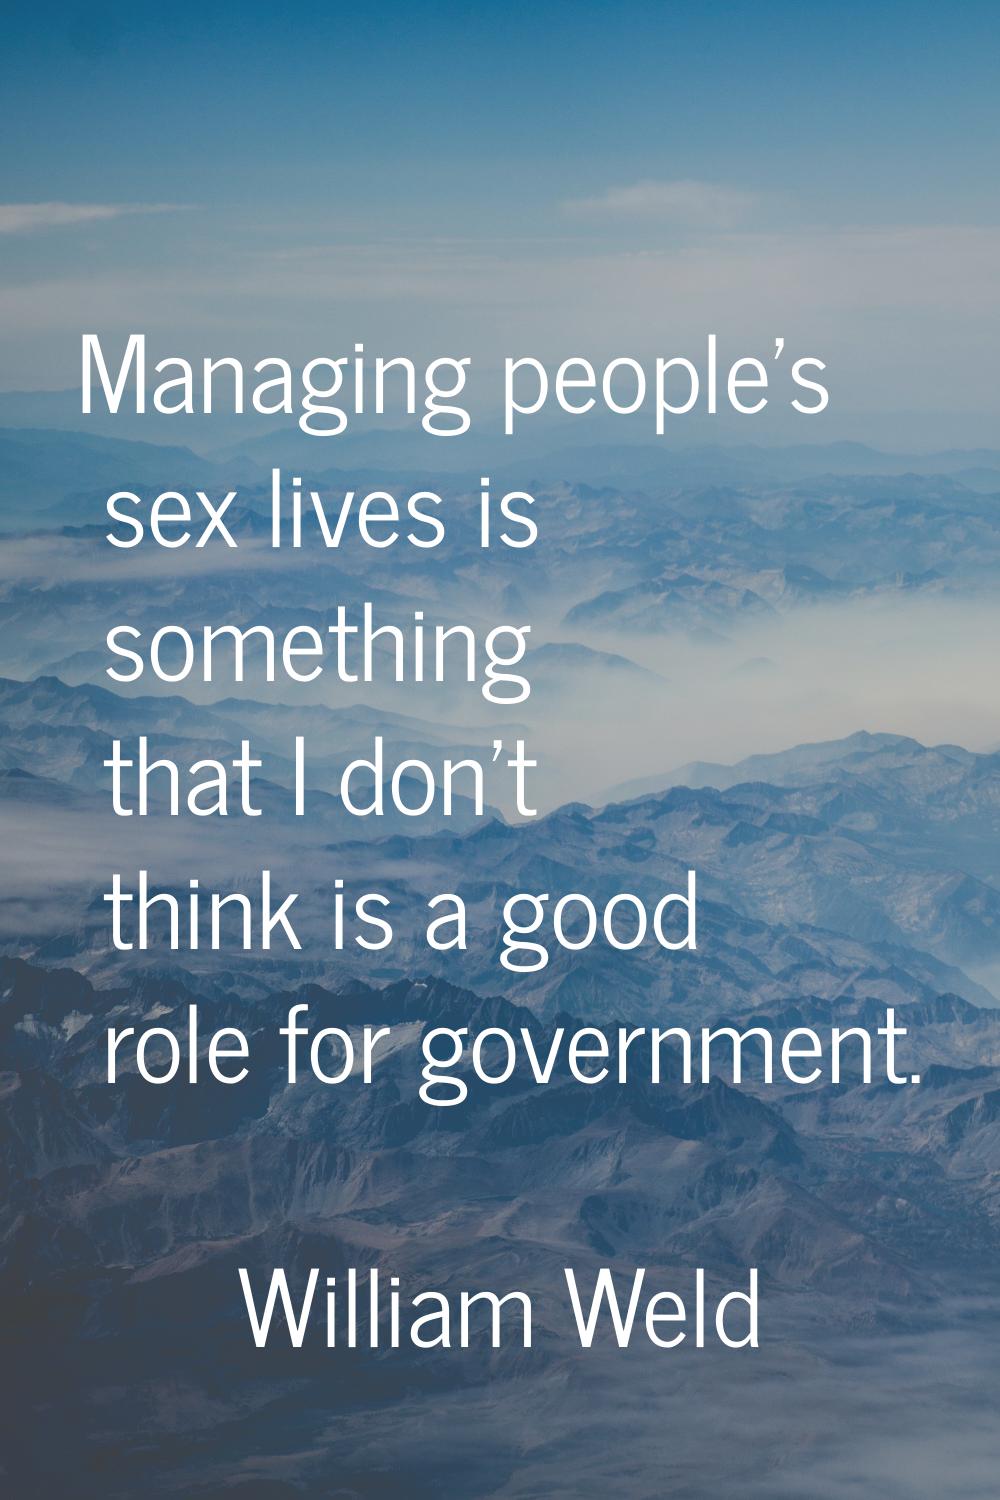 Managing people's sex lives is something that I don't think is a good role for government.